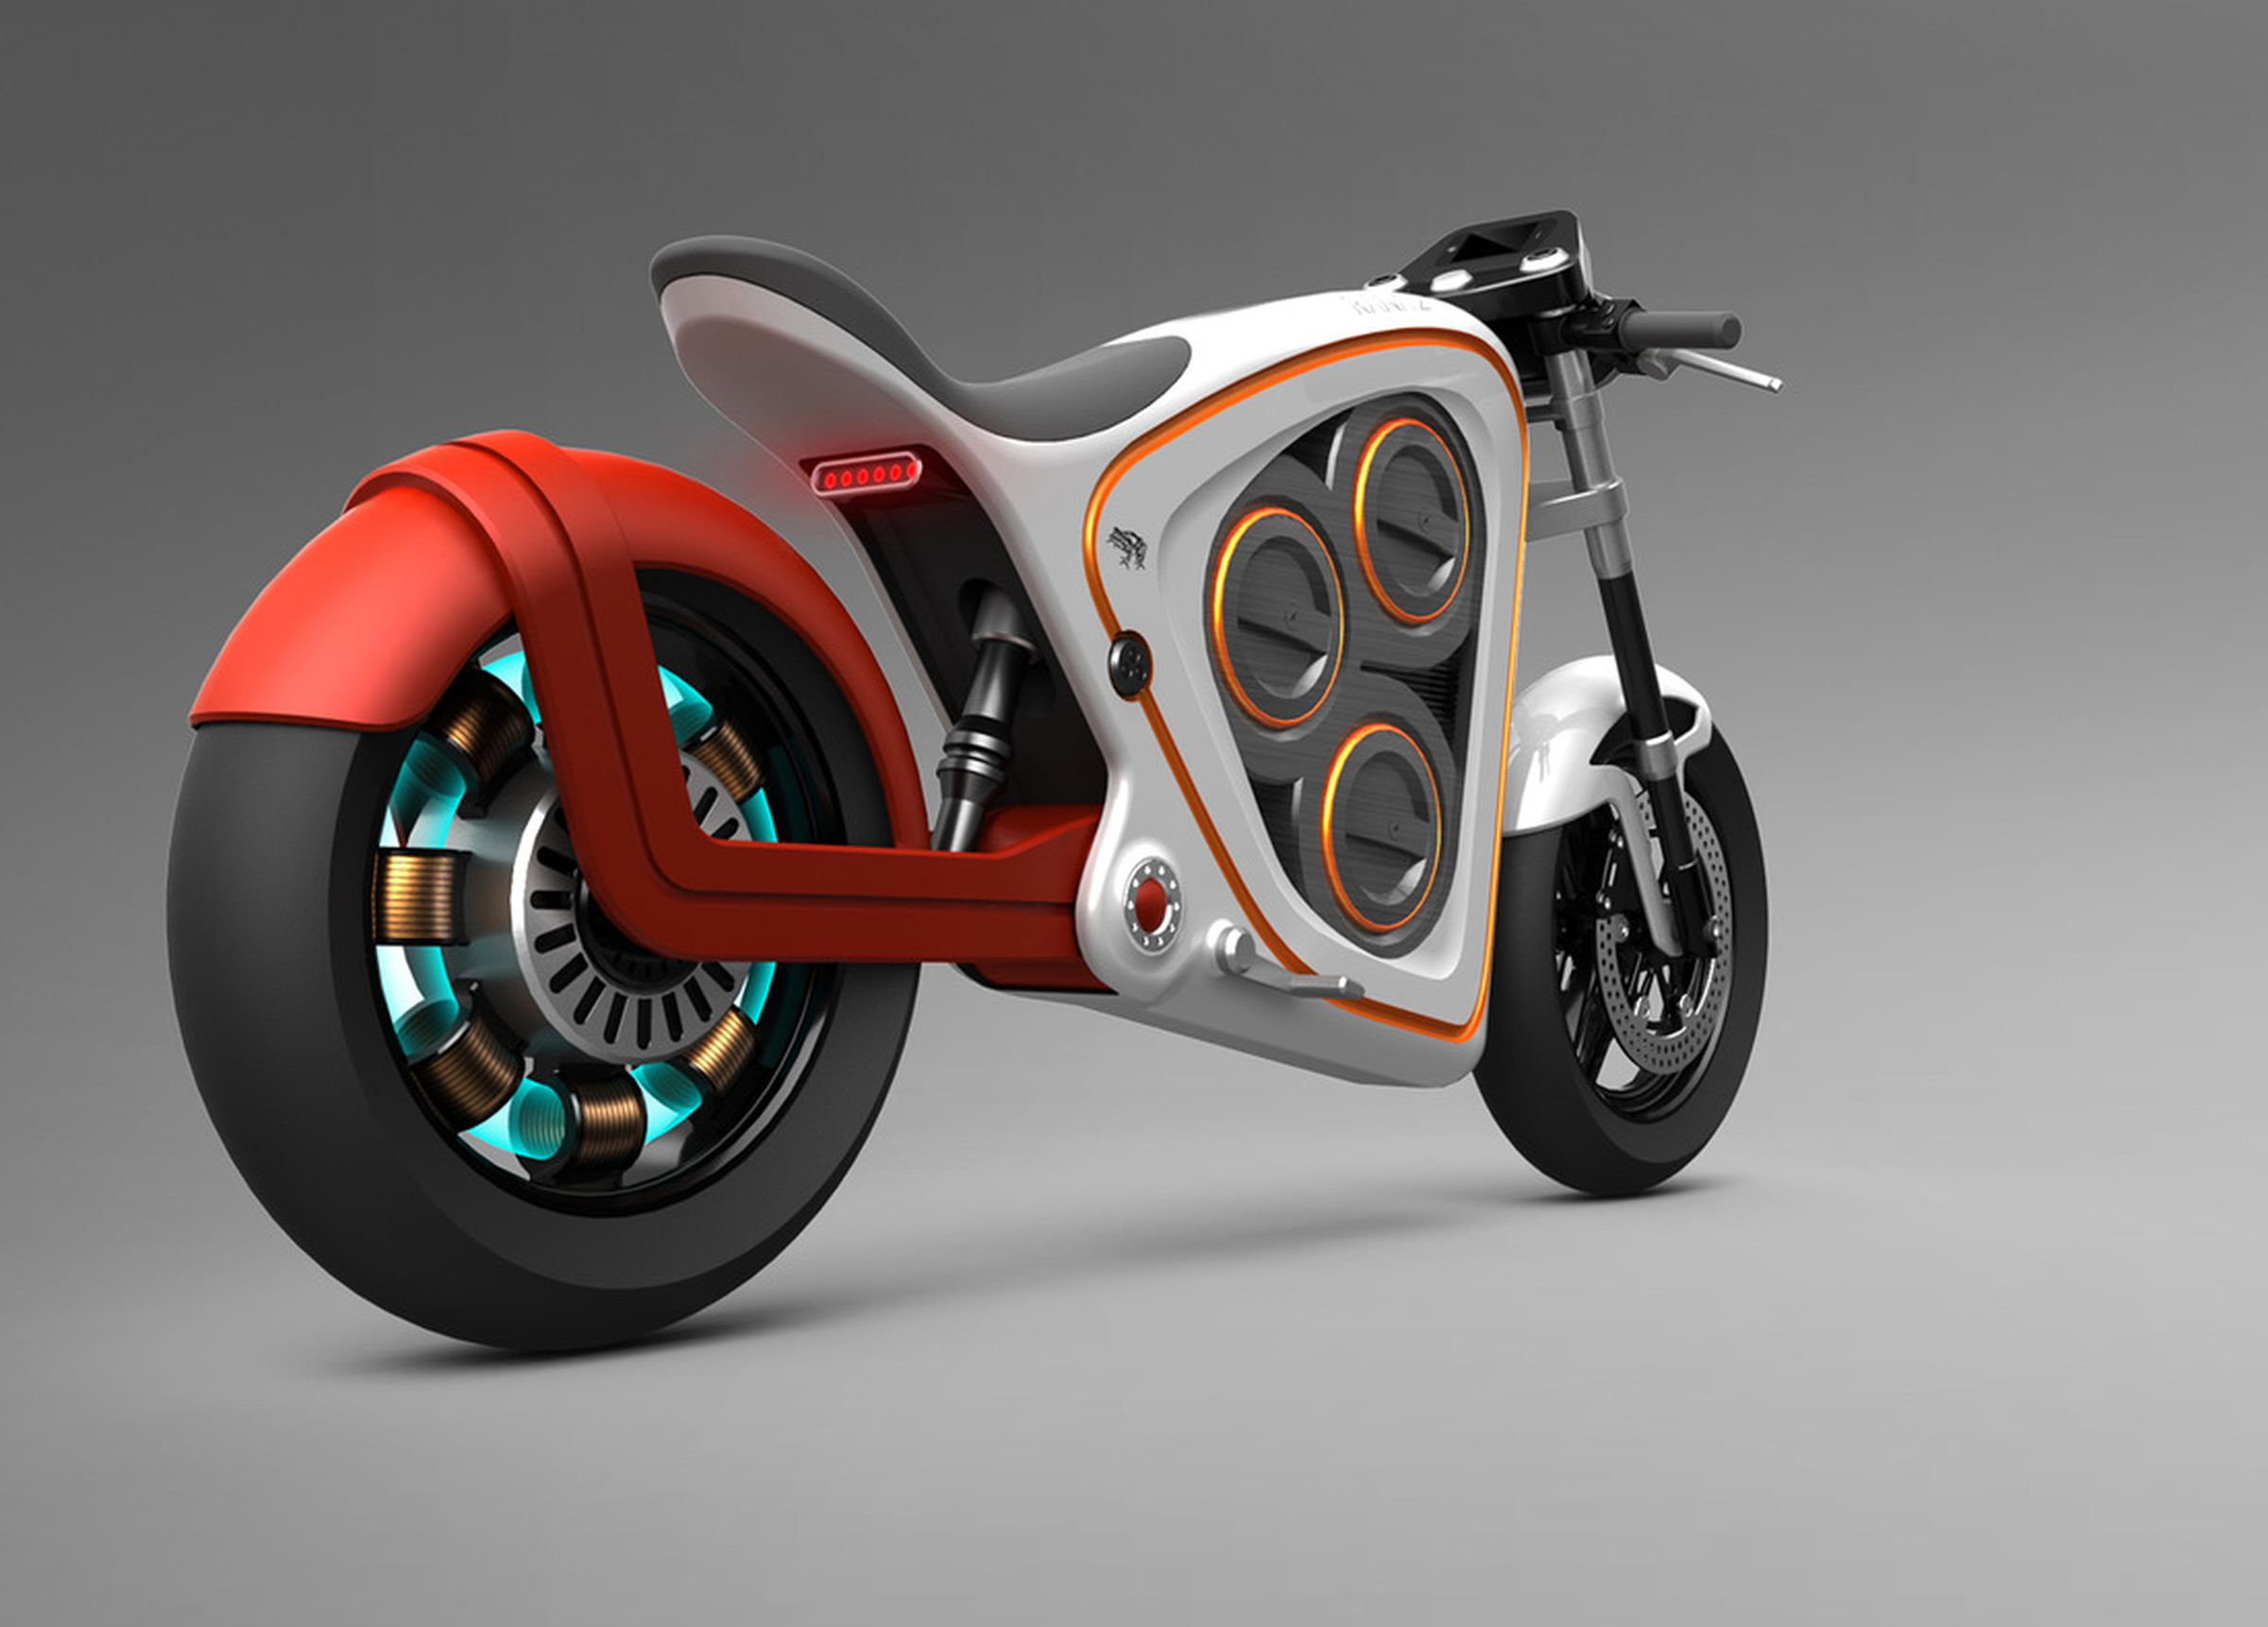 Frog Rana 2 electric motorcycle concept